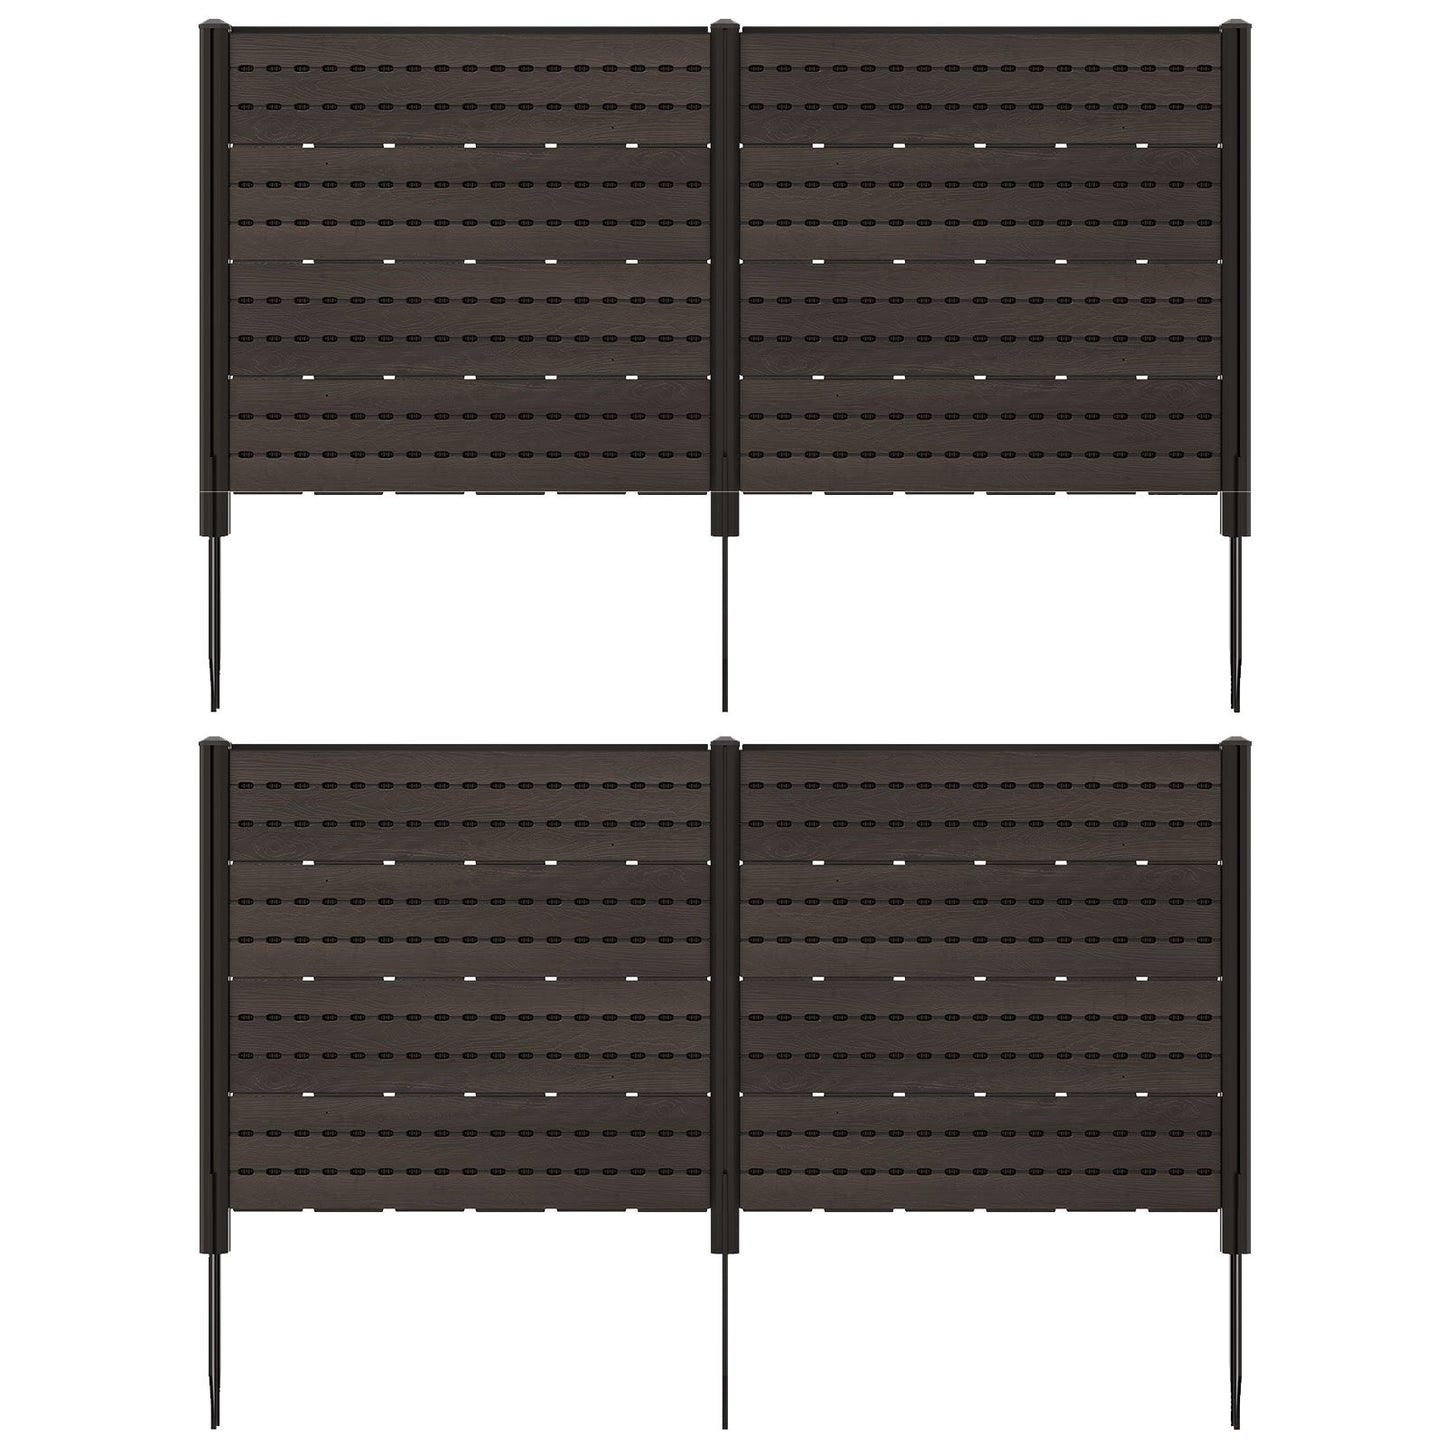 Outdoor Privacy Fence Screen with 5 Ground Stakes for Garden Yard Patio, Brown